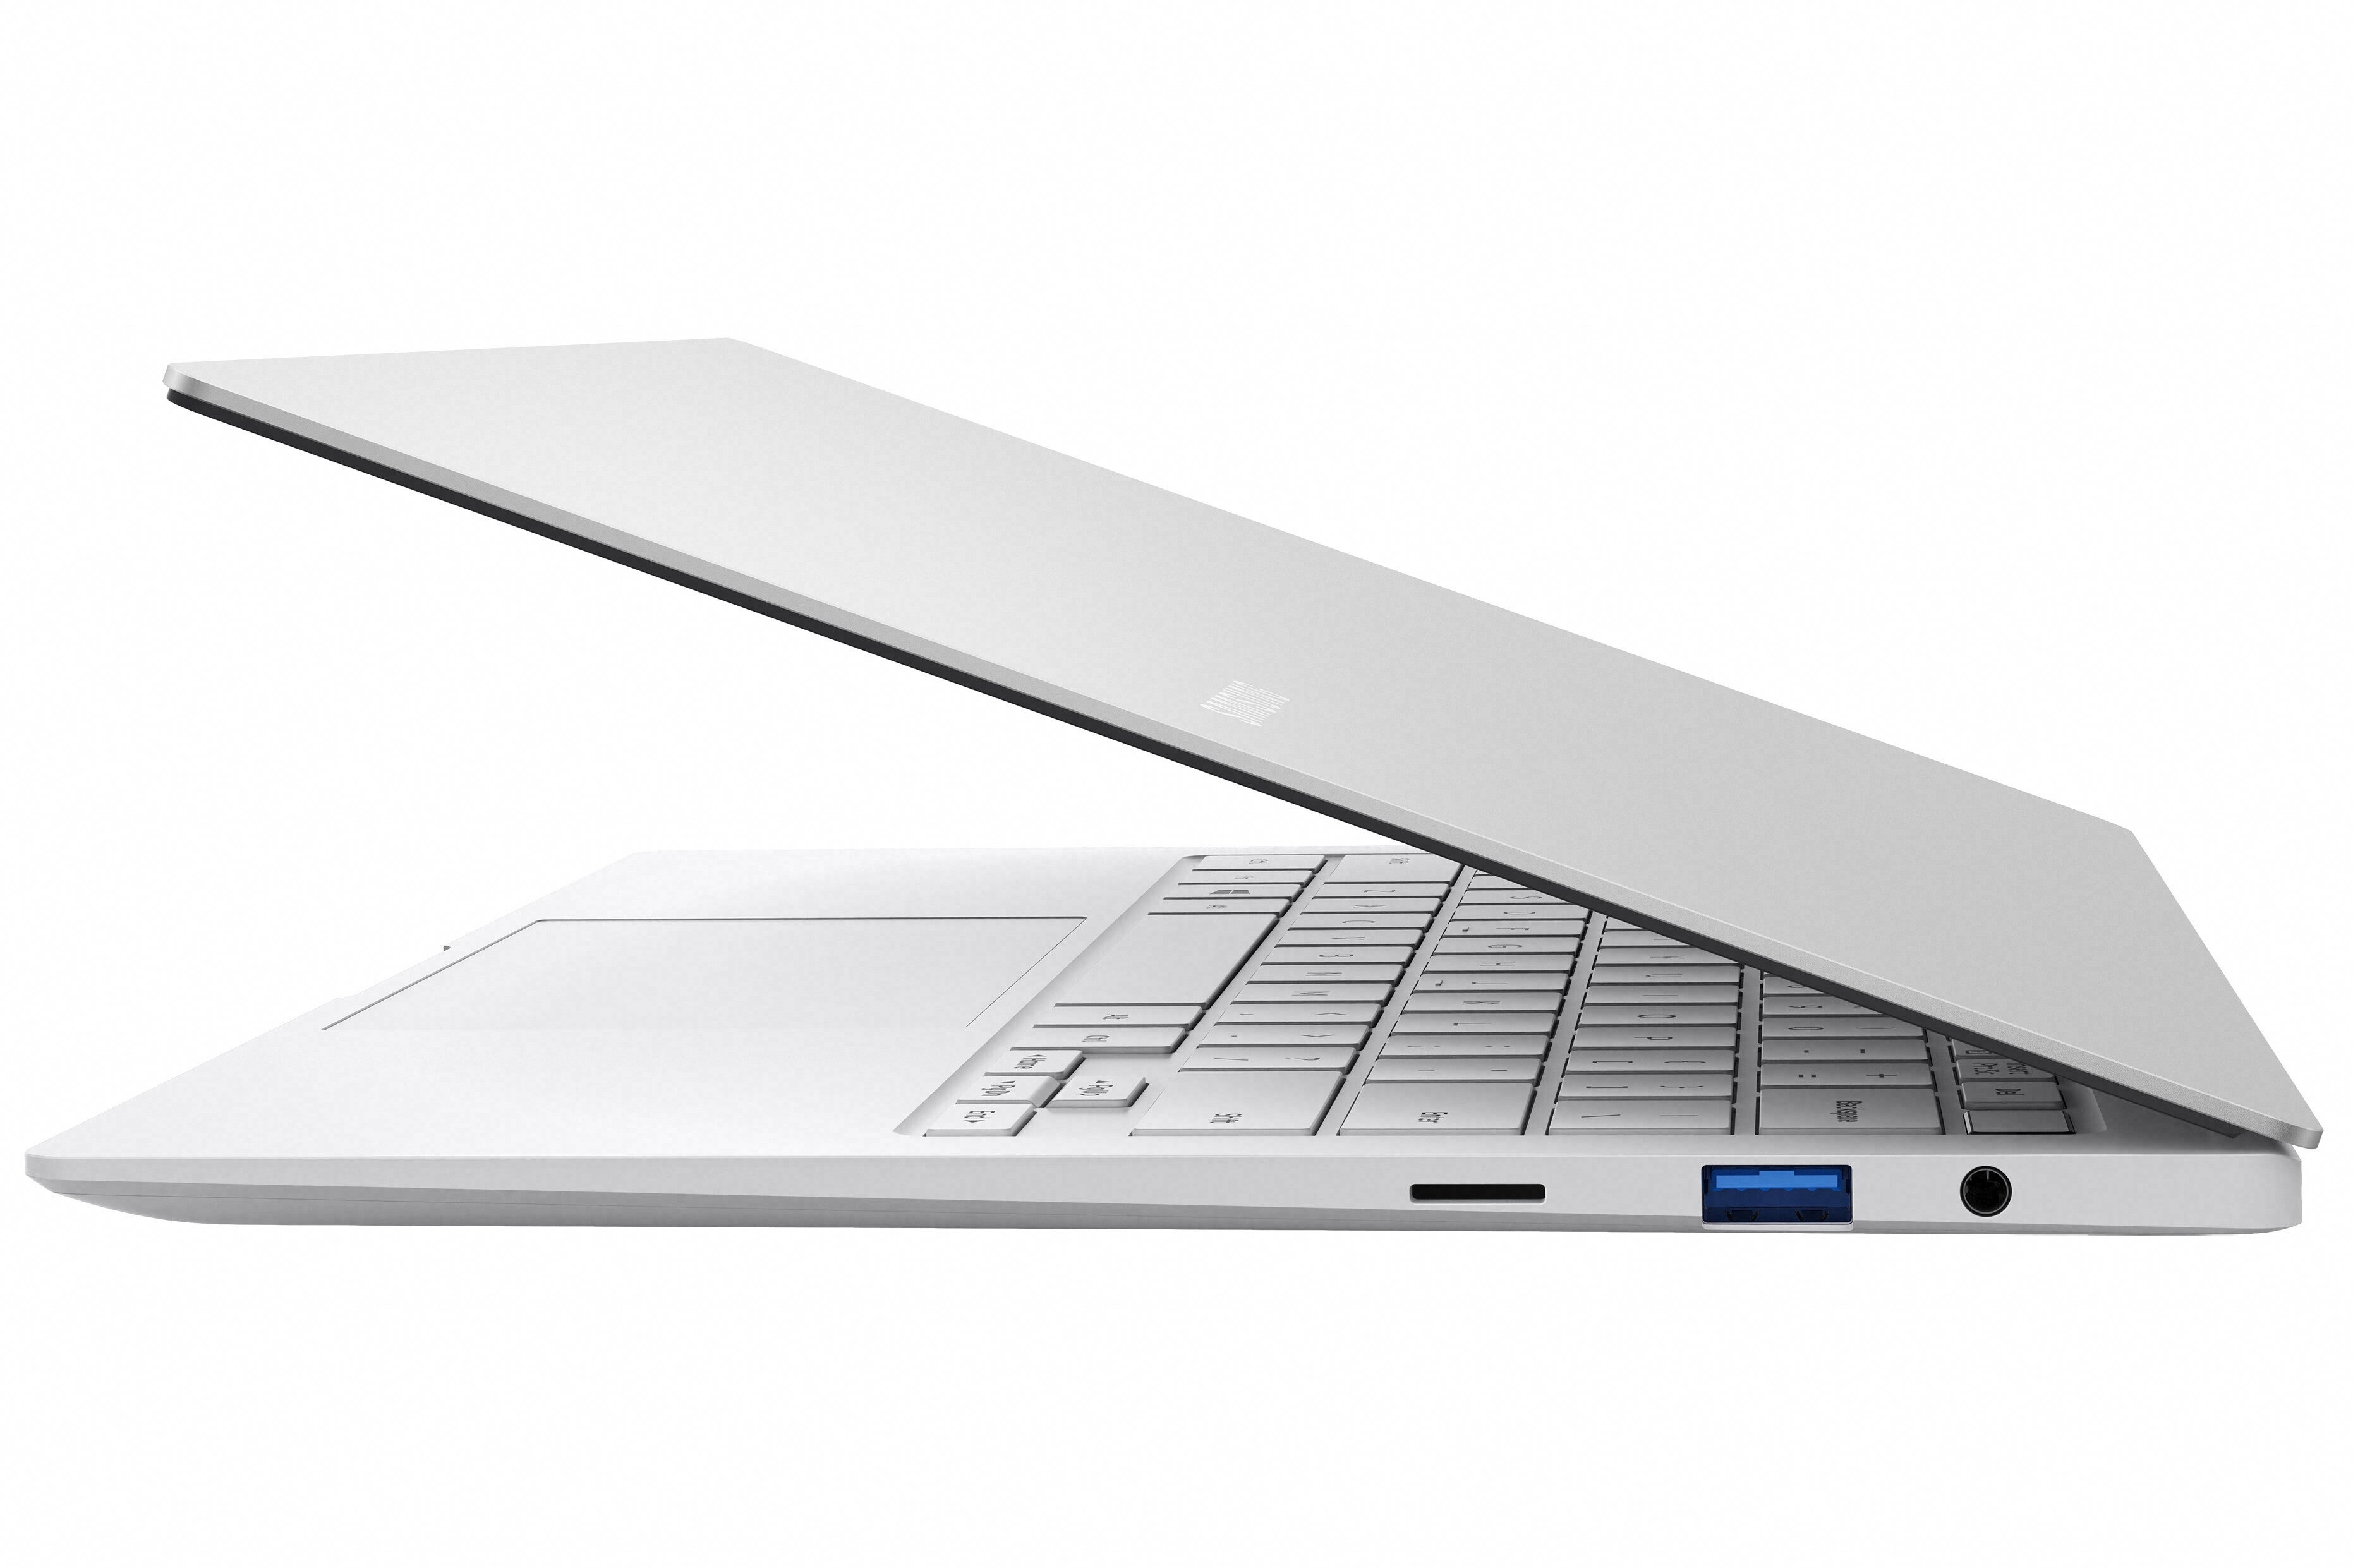 Samsungs New Galaxy Book Pro Laptops Are Thin Light And Smart Good